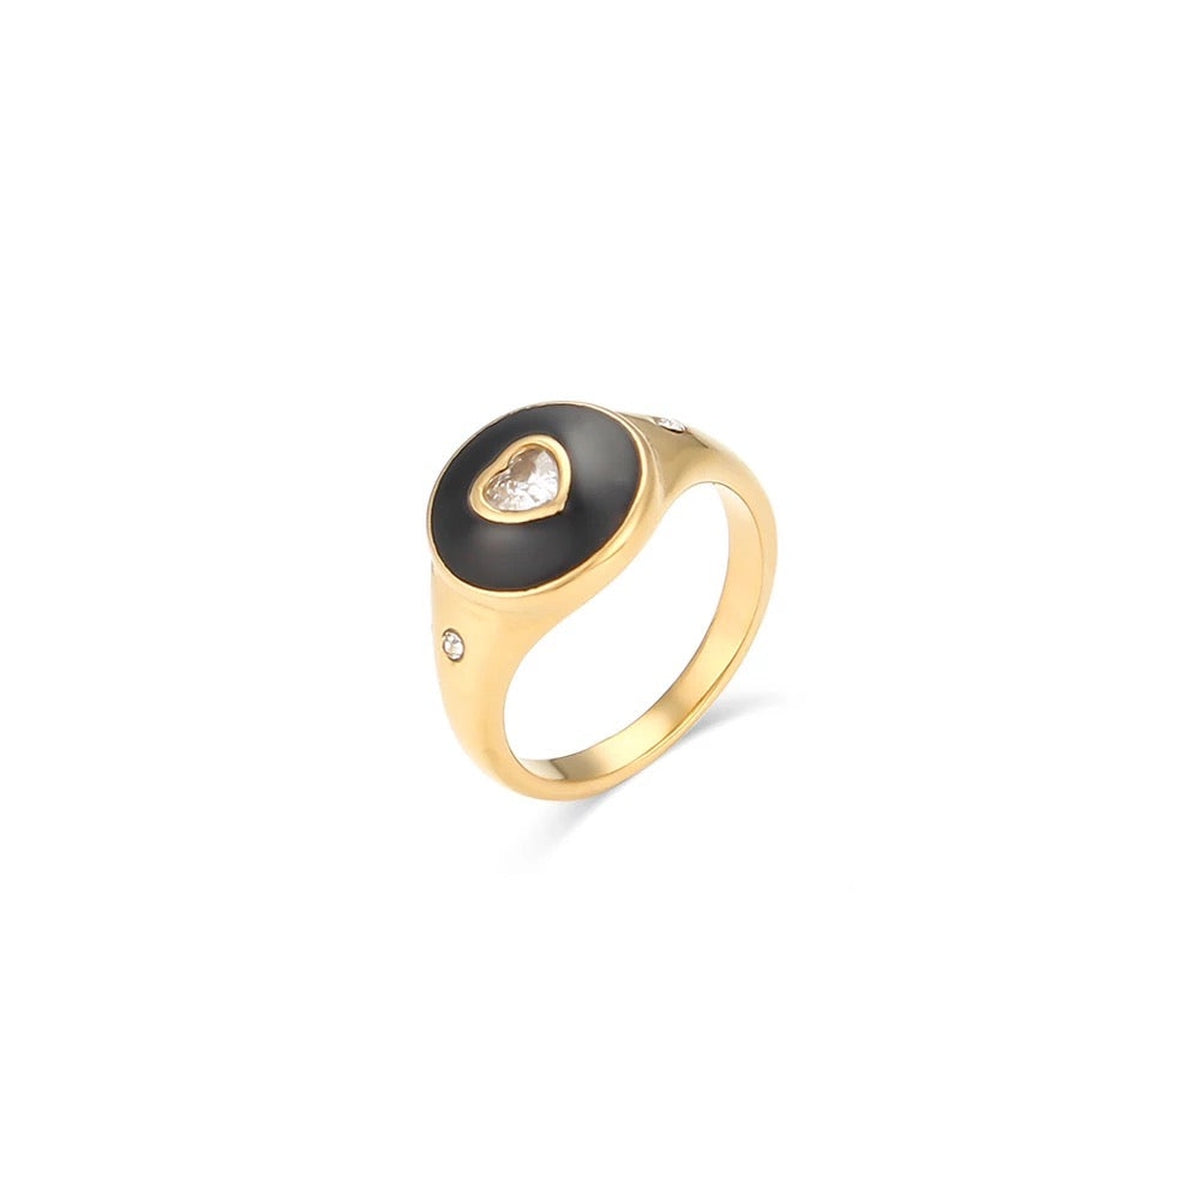 Central Heart Casual Enamel Ring